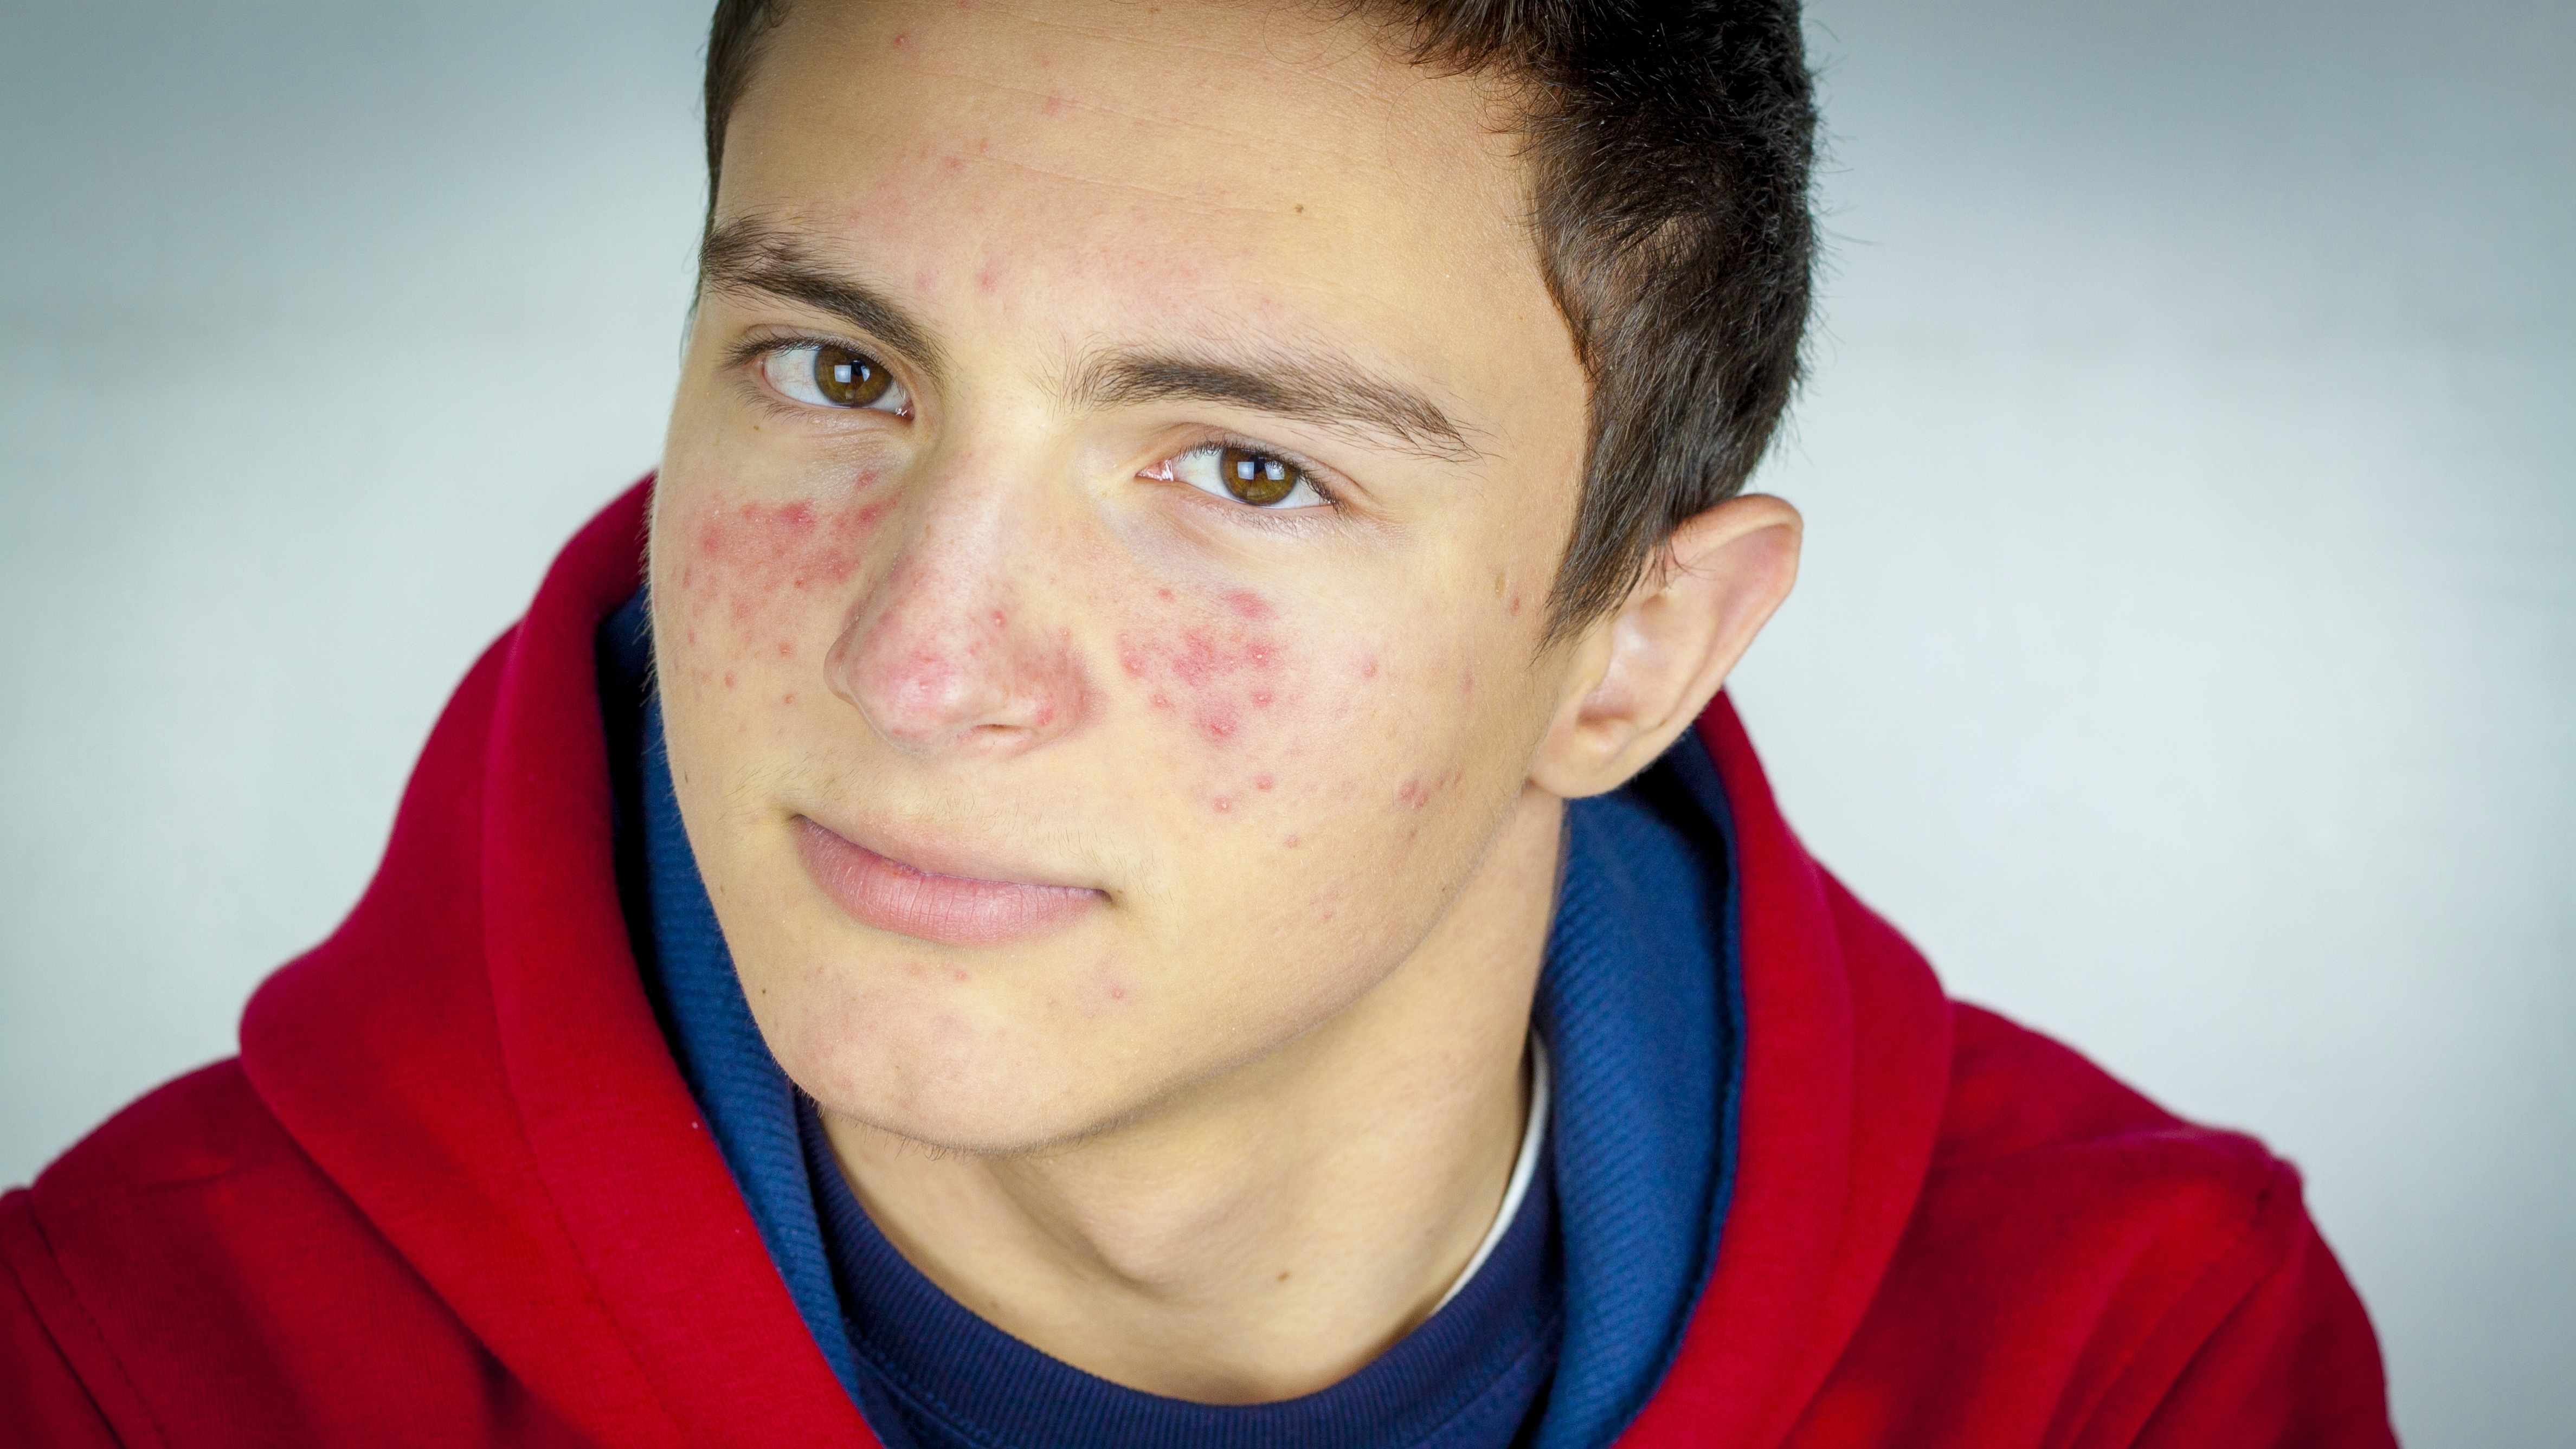 young teenage boy looking serious with acne on his face